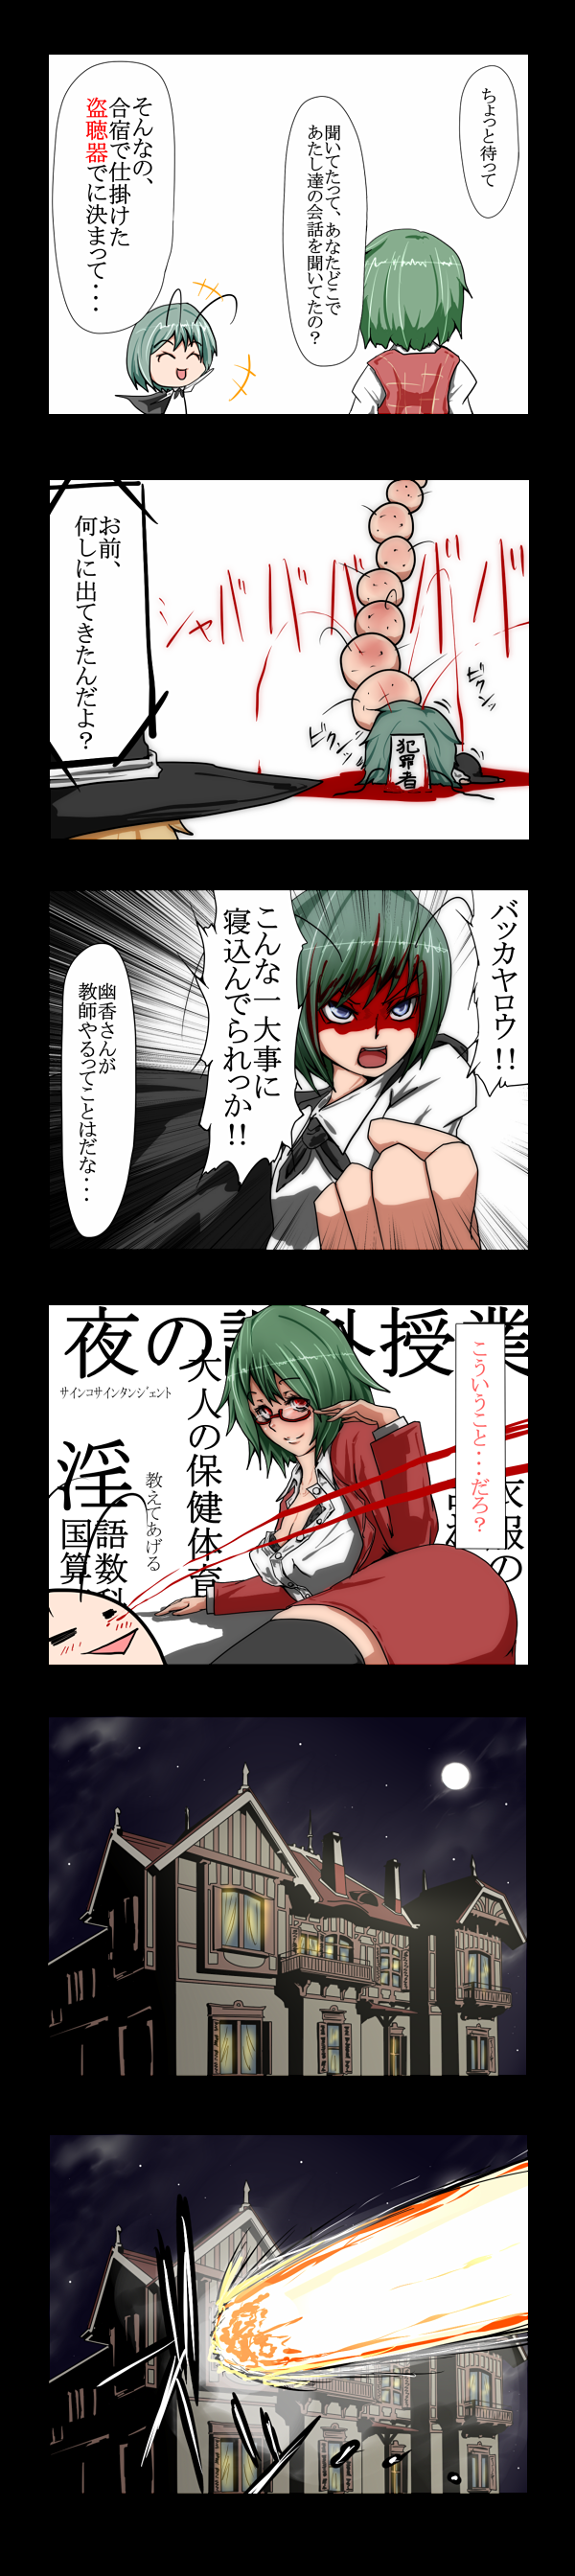 3girls absurdres alternate_costume antennae bespectacled blonde_hair blood blue_eyes breasts cape cleavage closed_eyes comic full_moon glasses green_hair hat head_bump highres house kazami_yuuka kirisame_marisa long_image master_spark moon multiple_girls night nosebleed open_mouth potato_pot red_eyes short_hair smile tall_image thigh-highs touhou translation_request witch_hat wriggle_nightbug